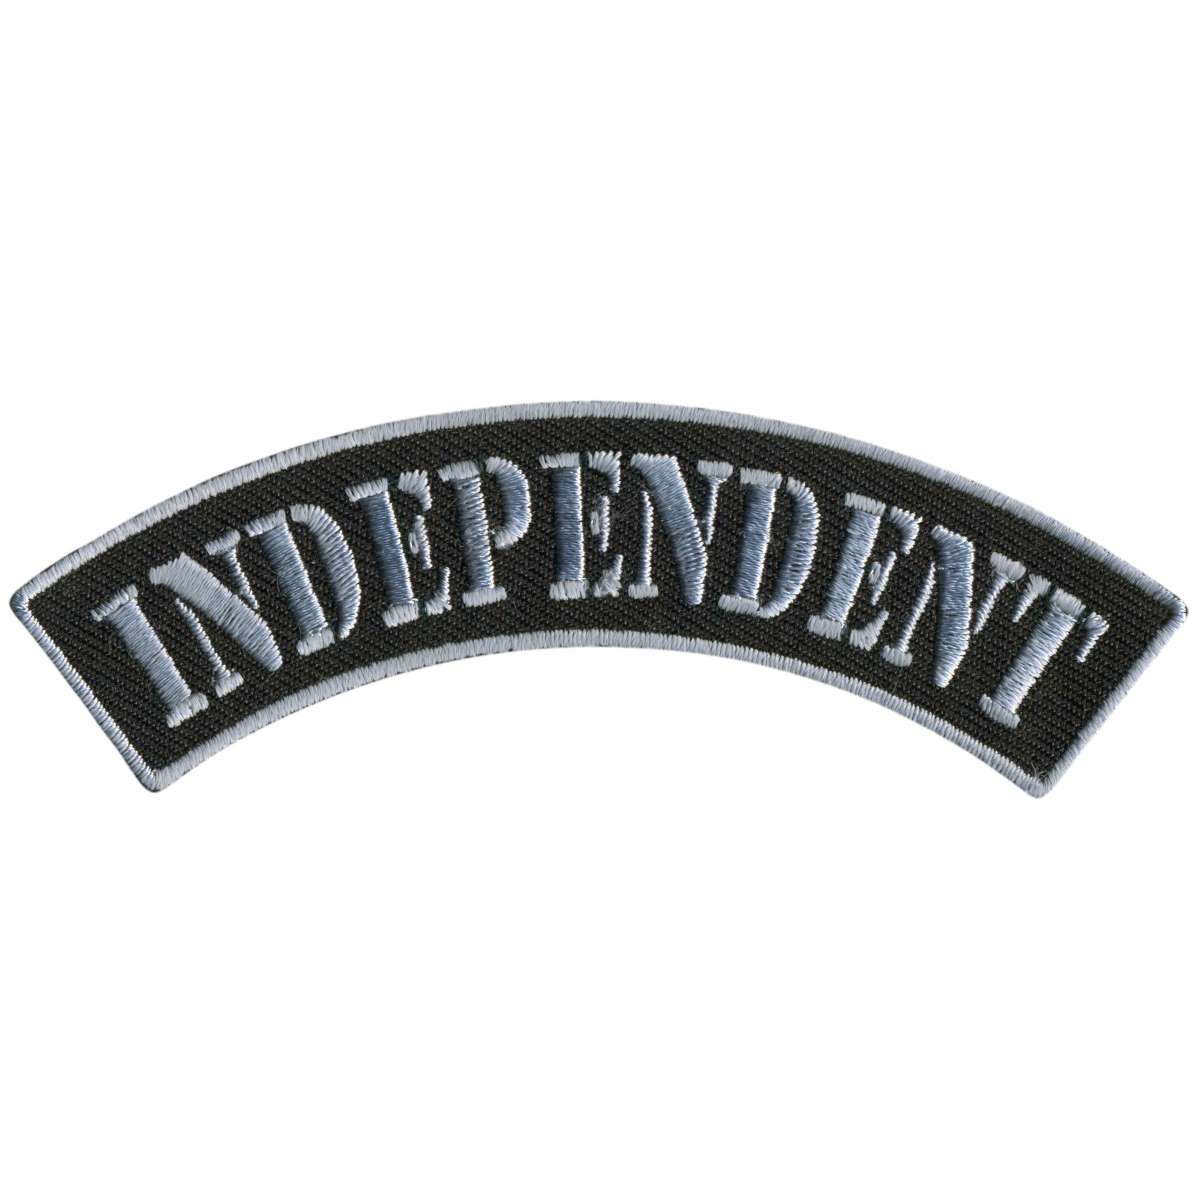 Hot Leathers Independent 4” X 1” Top Rocker Patch PPM4170